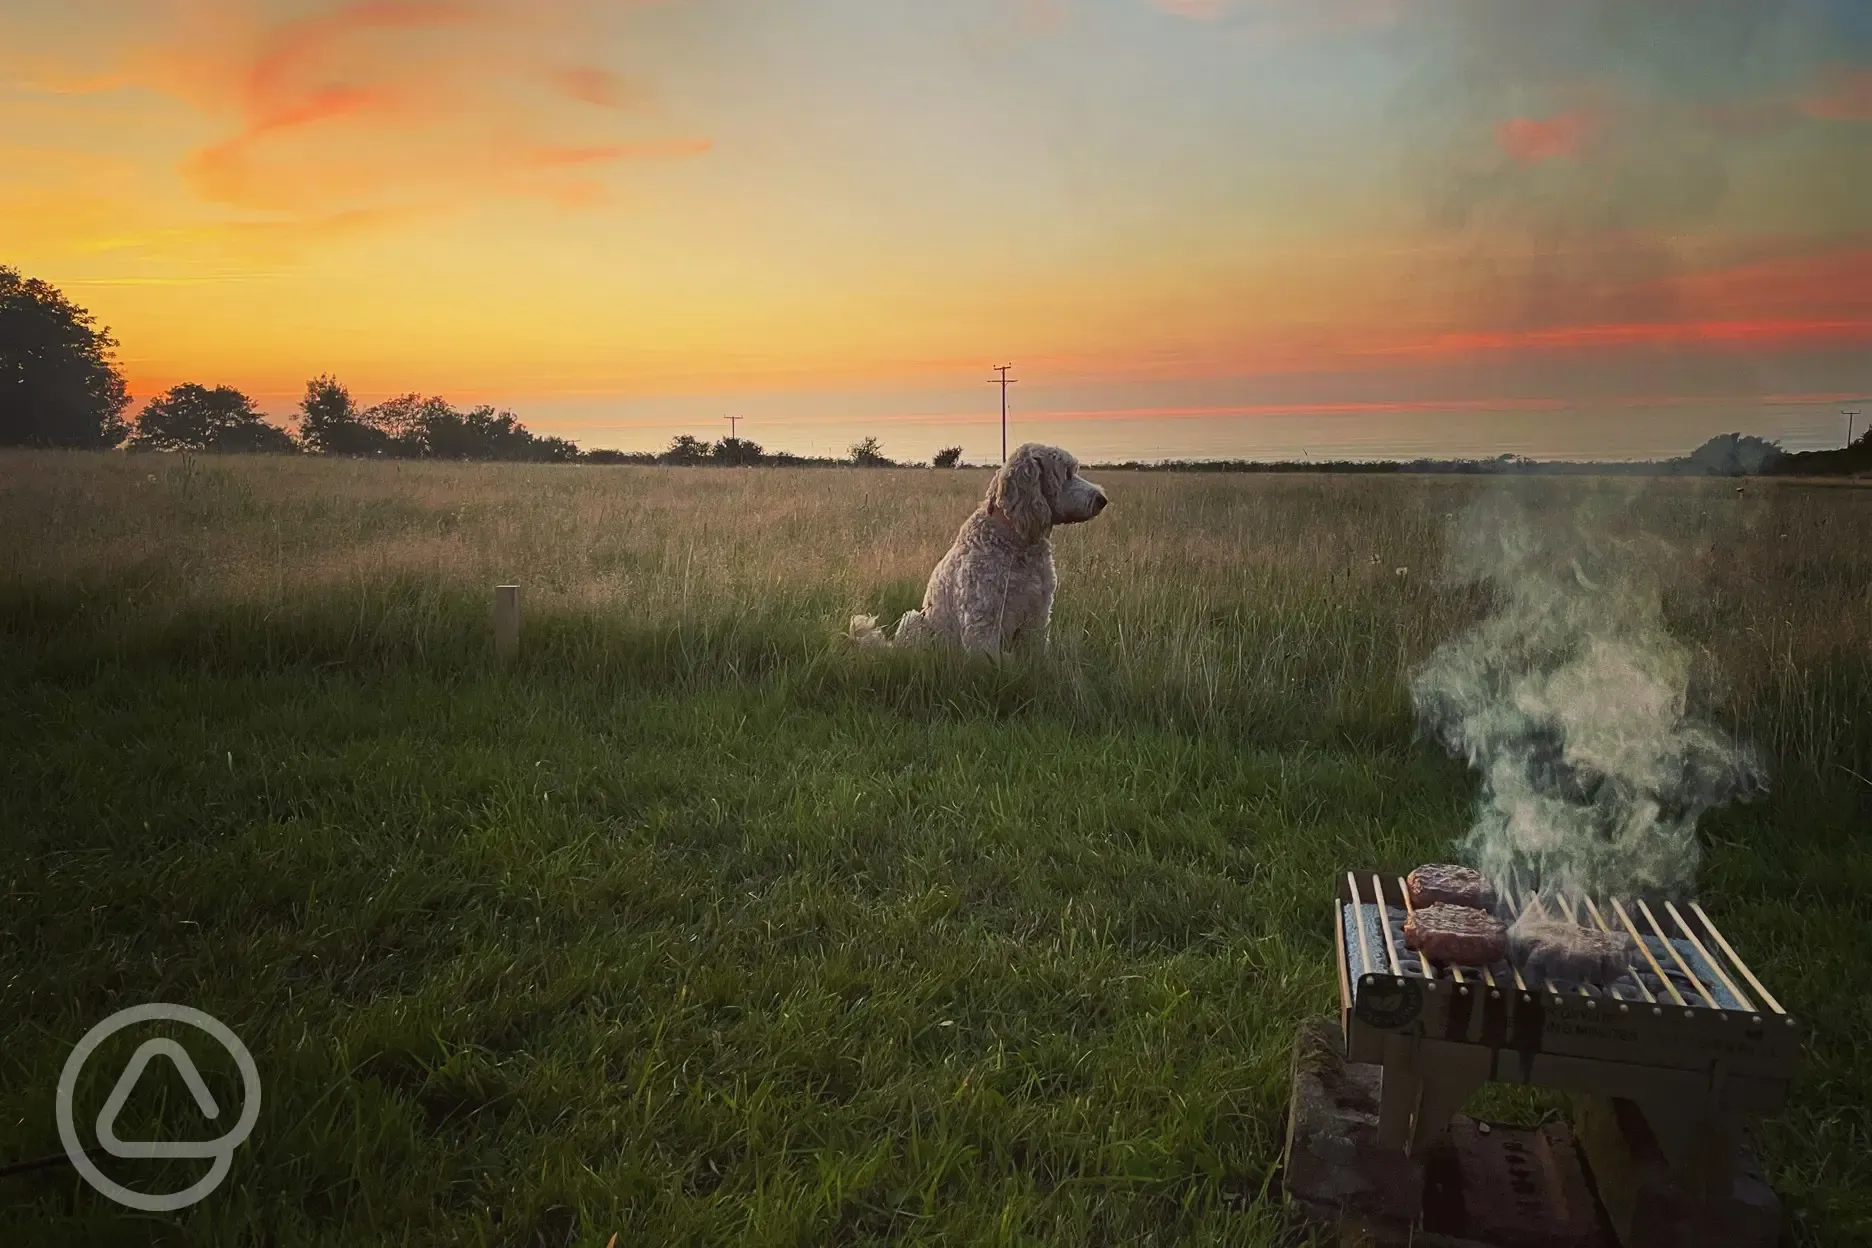 Dogs, Bbq's and sunset...